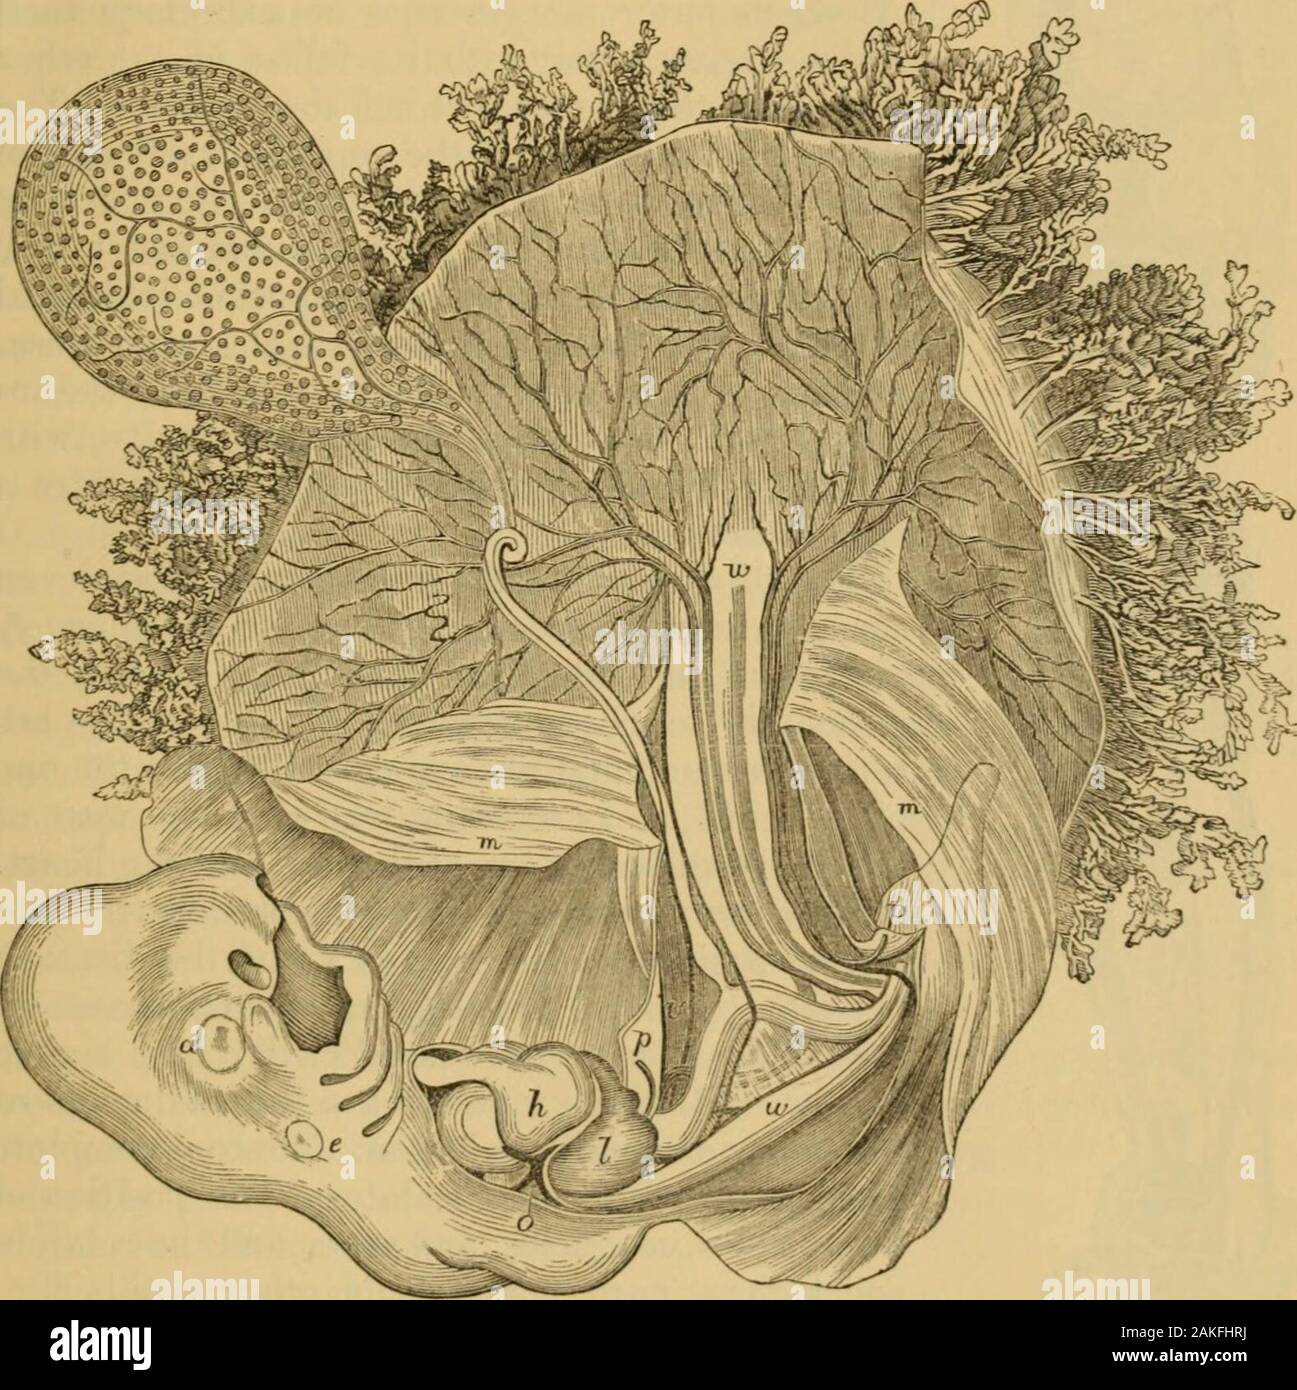 A System of midwifery : including the diseases of pregnancy and the puerperal state . ccompanying representation of the product of an abortion aboutthe twenty-fifth to the twenty-eighth day, shows the embryo and itsmembranes partly dissected, and magnified about seven times and ahair. The Chorion, which has been opened in its whole extent, isrecognized by its villi externally, and the numerous bloodvessels on itsinternal surface. Above, and to the left, is seen the umbilical vesicle,with the branches of the oinphalo-mesenteric vessels coursing upon it.It lies, as has already been shown, betwee Stock Photo